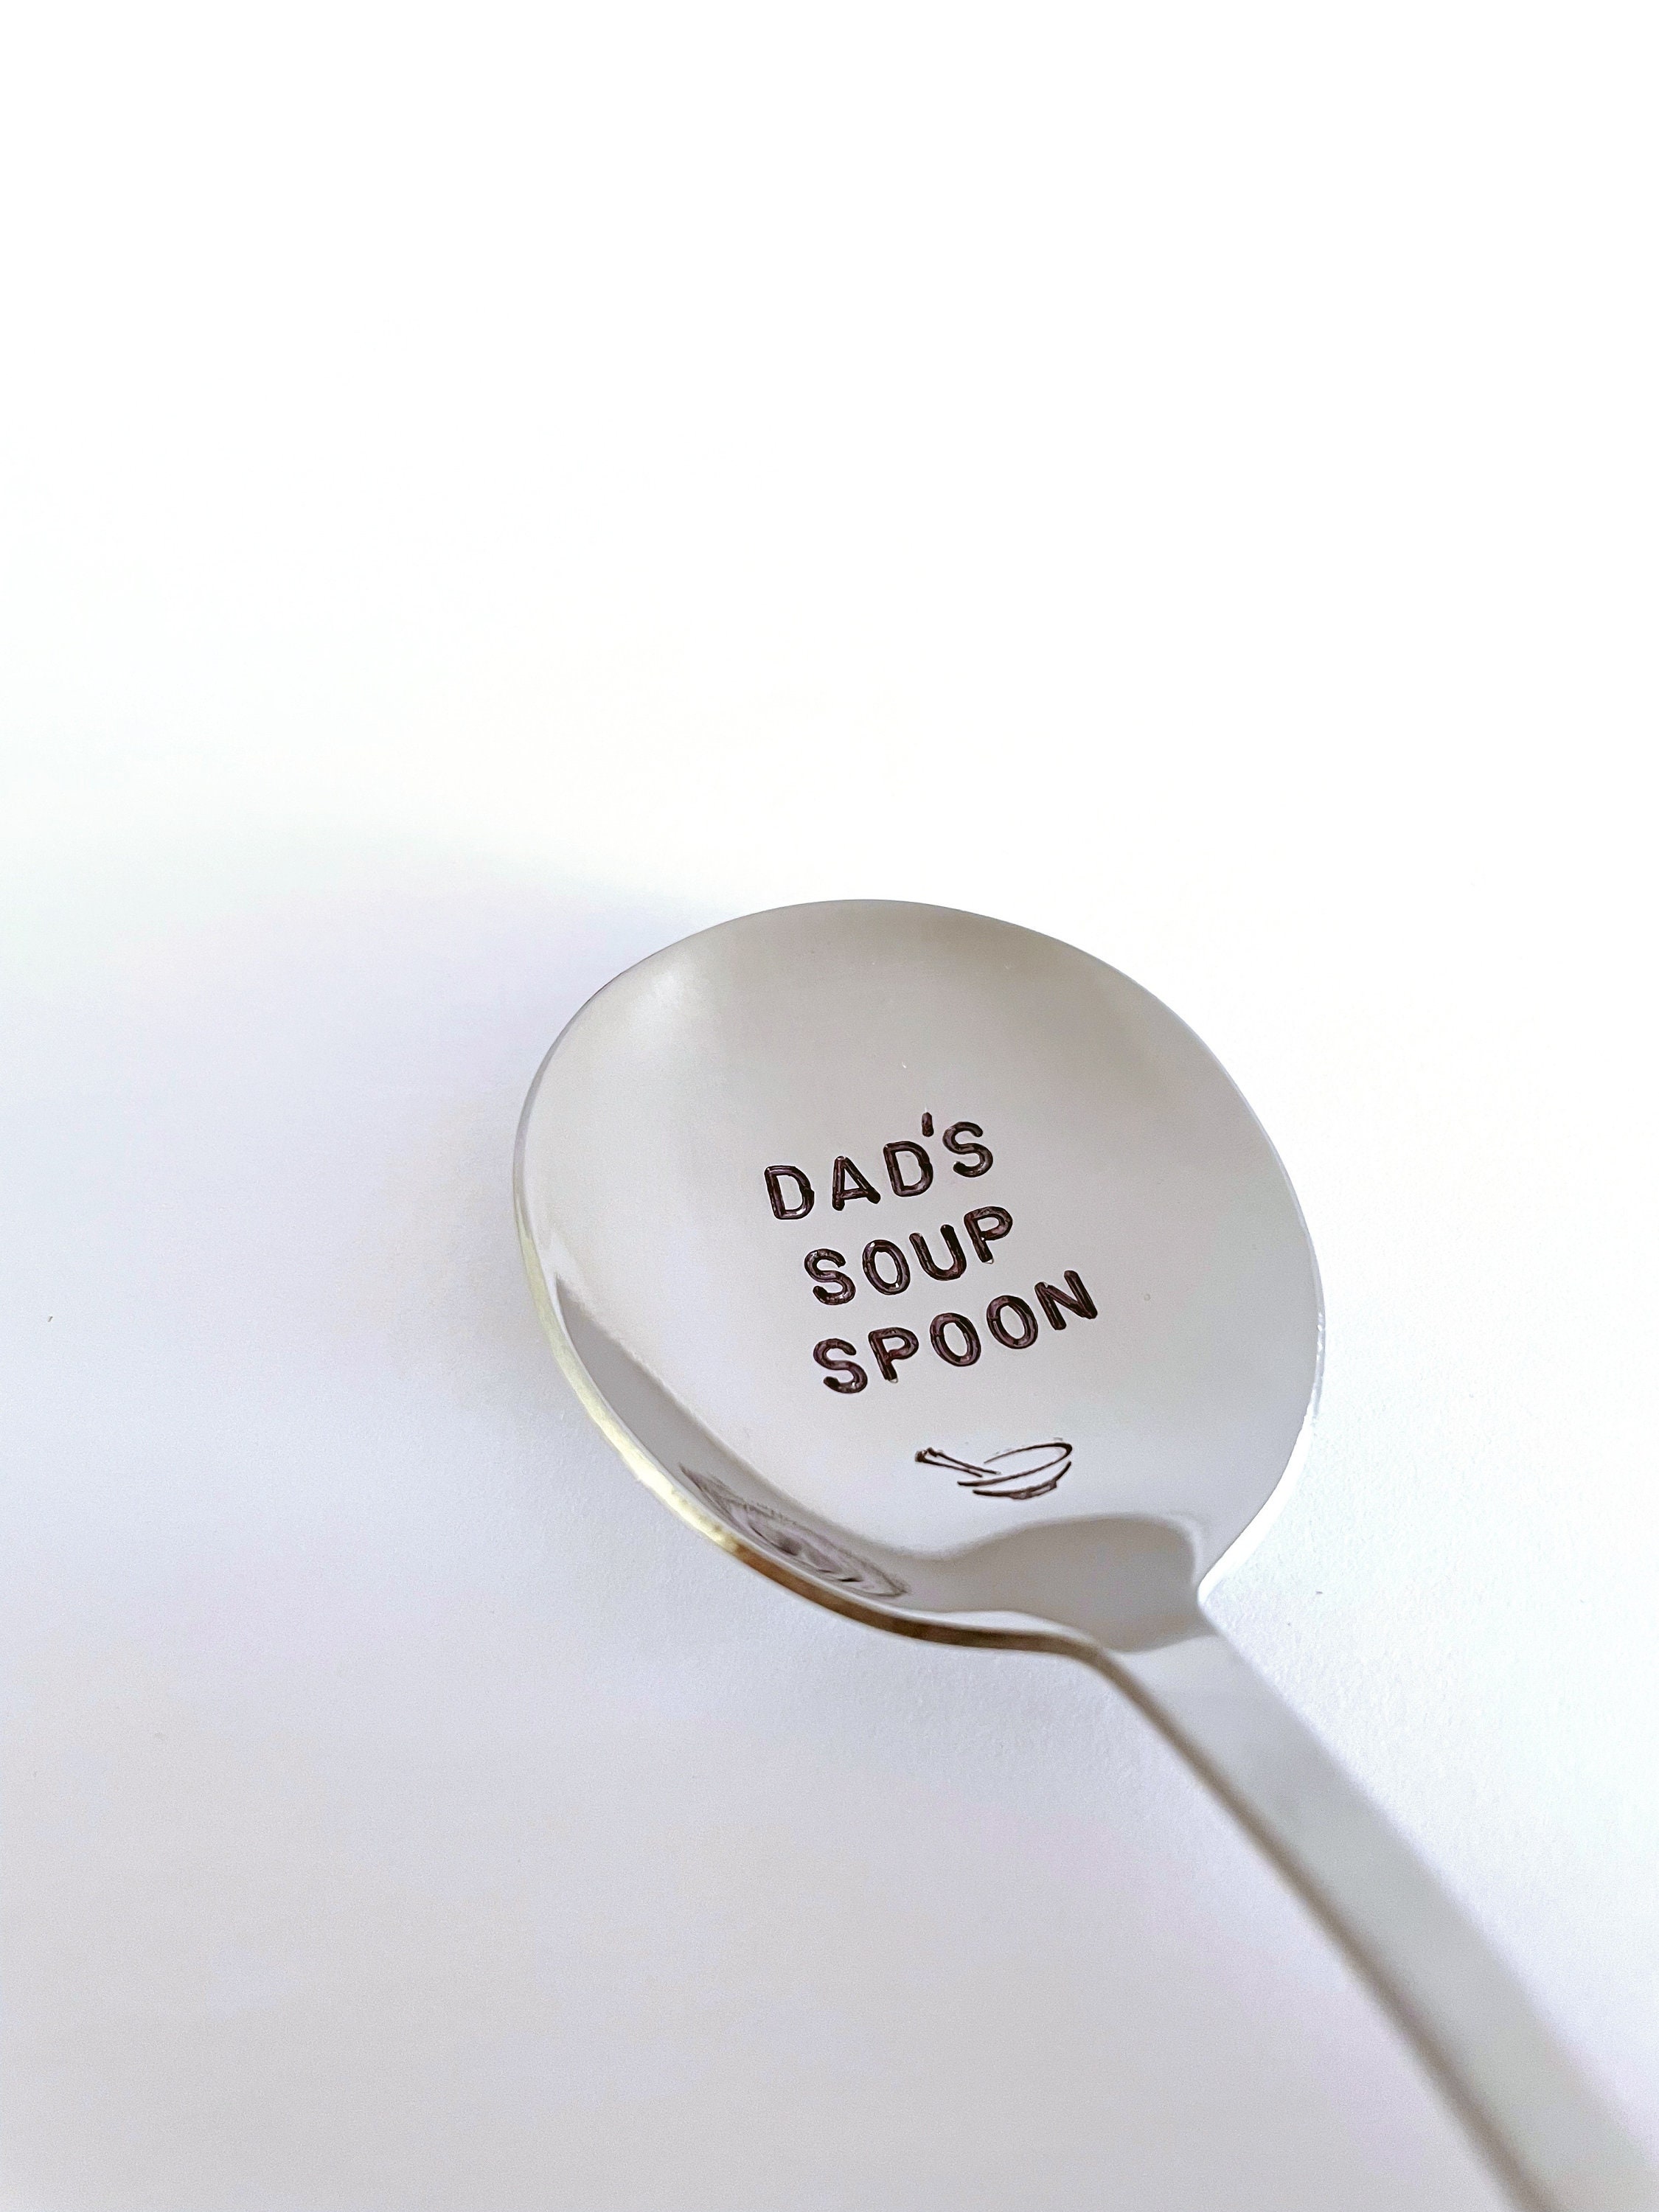 Peanut Butter Spoon Gifts for Women Men Peanut Butter Lovers  Gifts for Couple Gifts for Boy Girl Gifts for Husband Pb Spoons Engraved My Peanut  Butter Spoon Gifts: Spoons